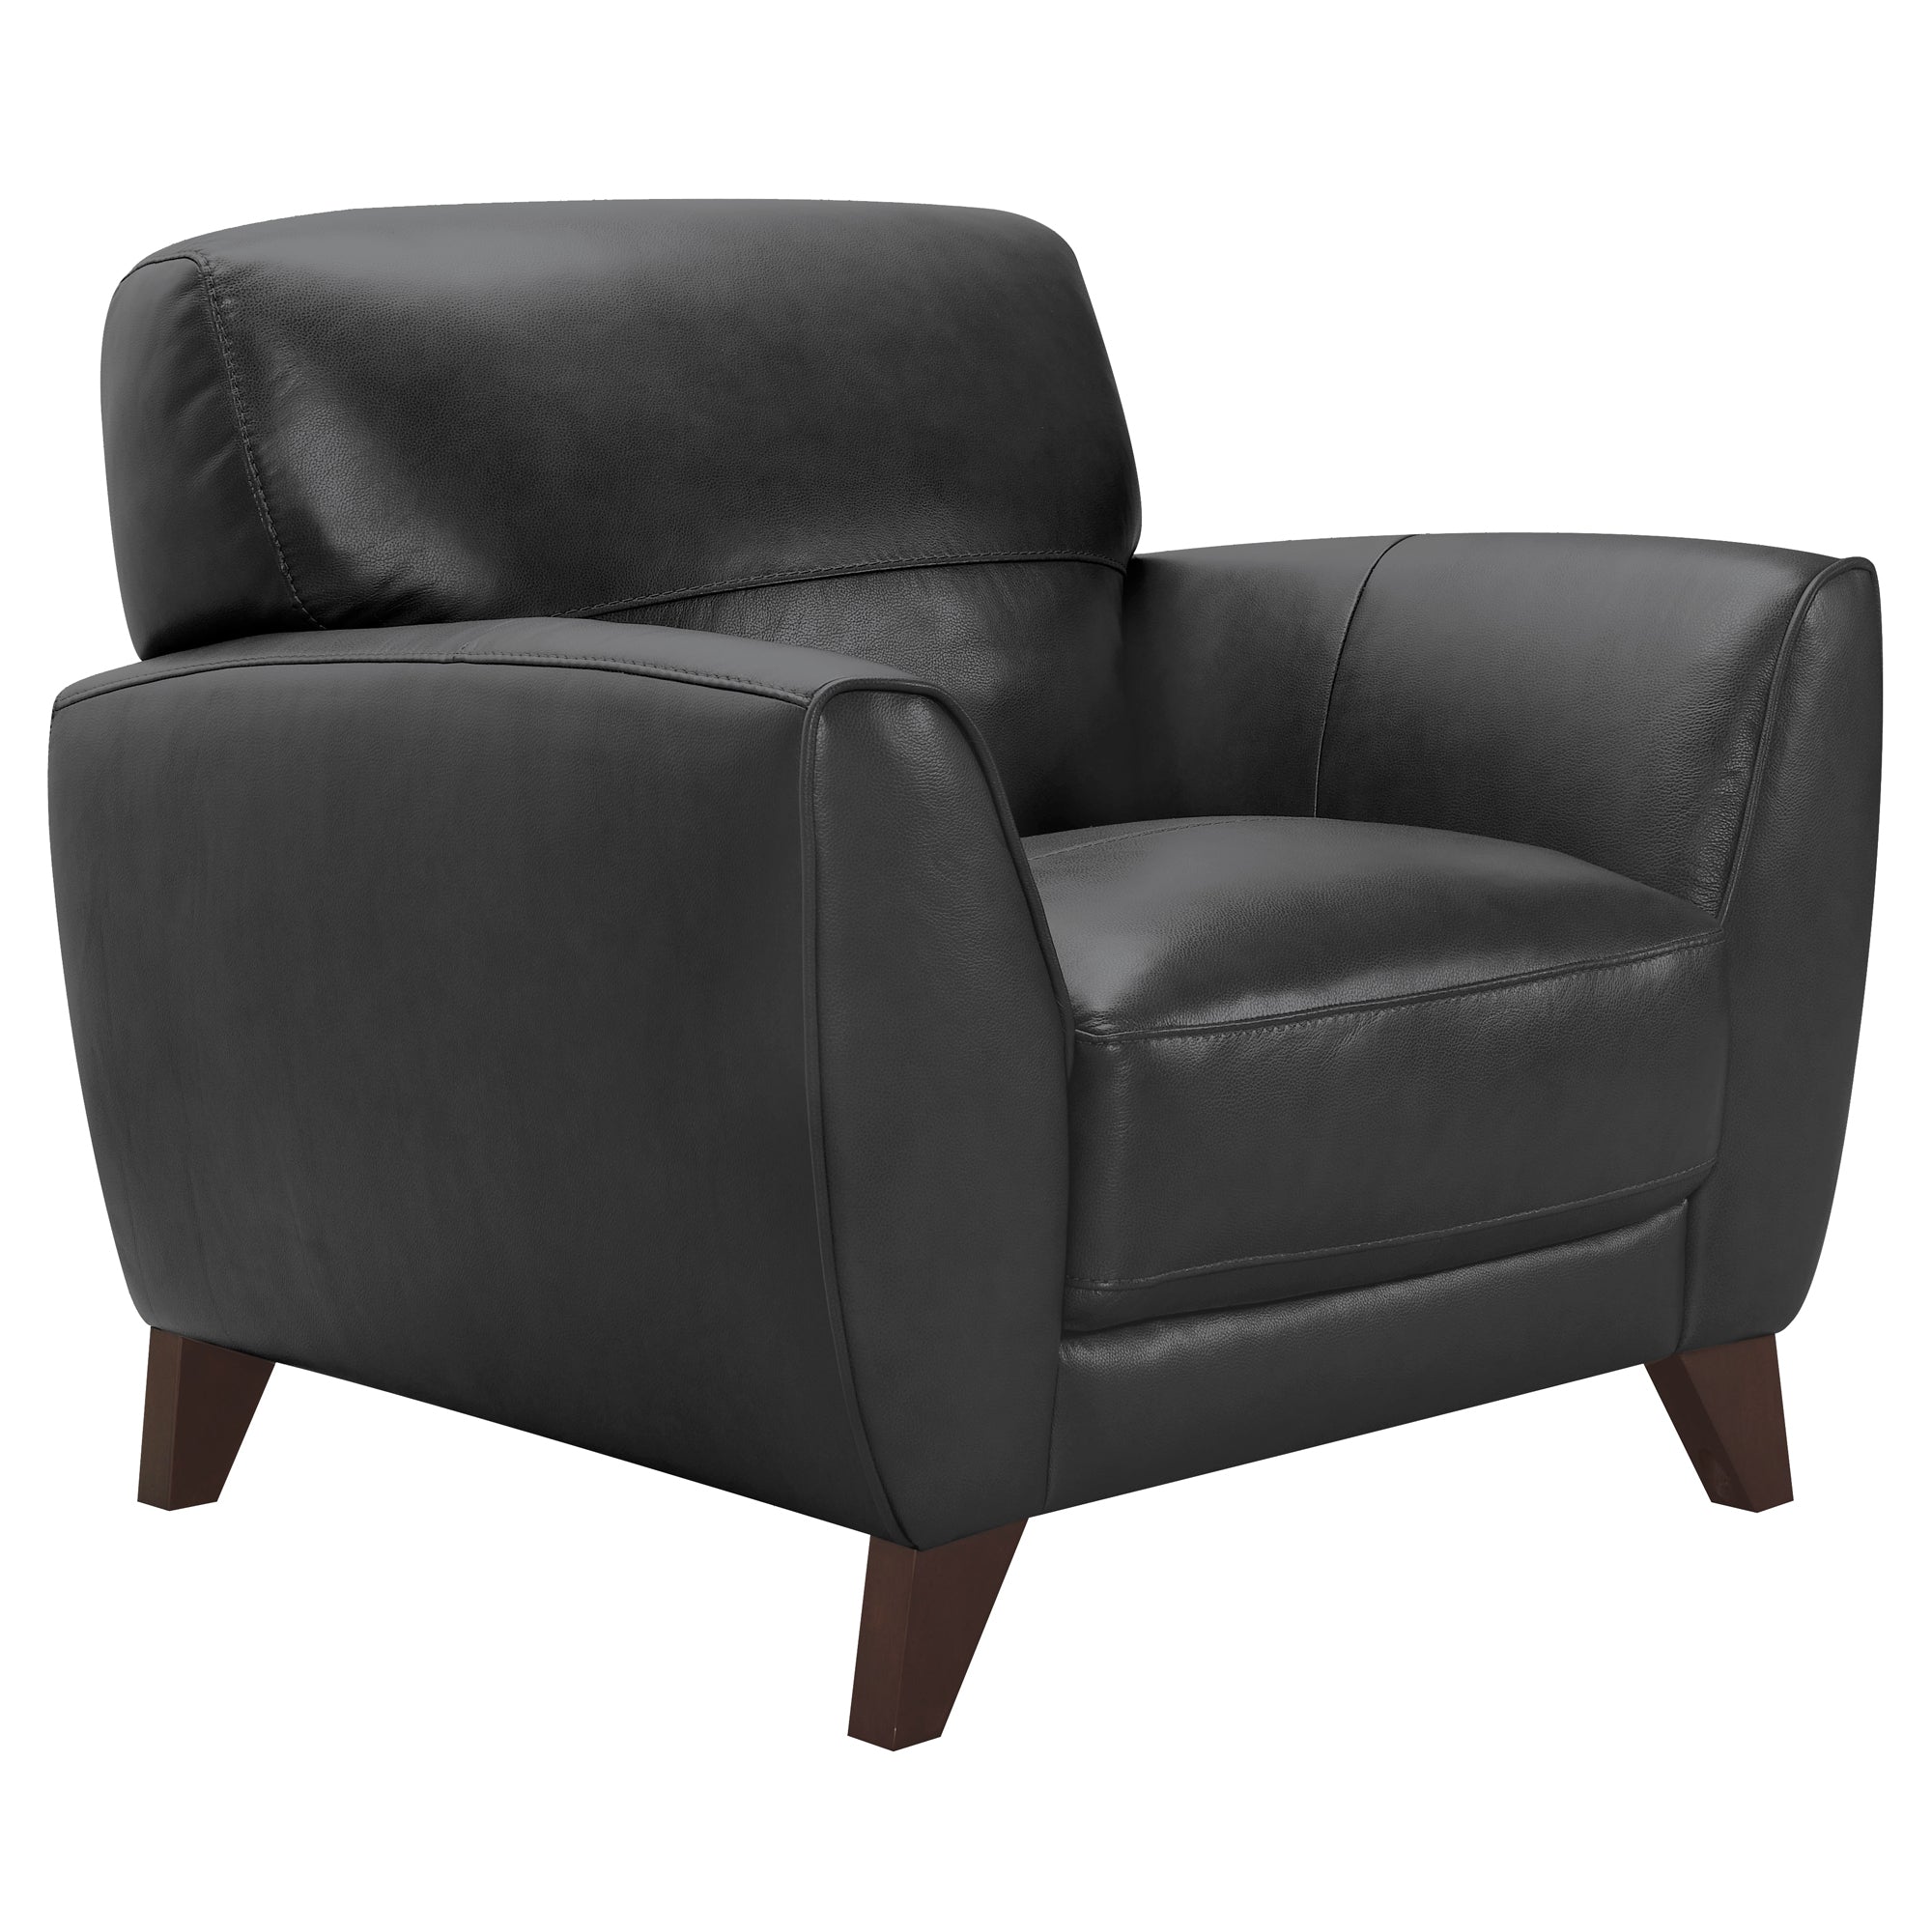 Armen Living Lcjd1bl Jedd Contemporary Chair In Genuine Black Leather With Brown Wood Legs